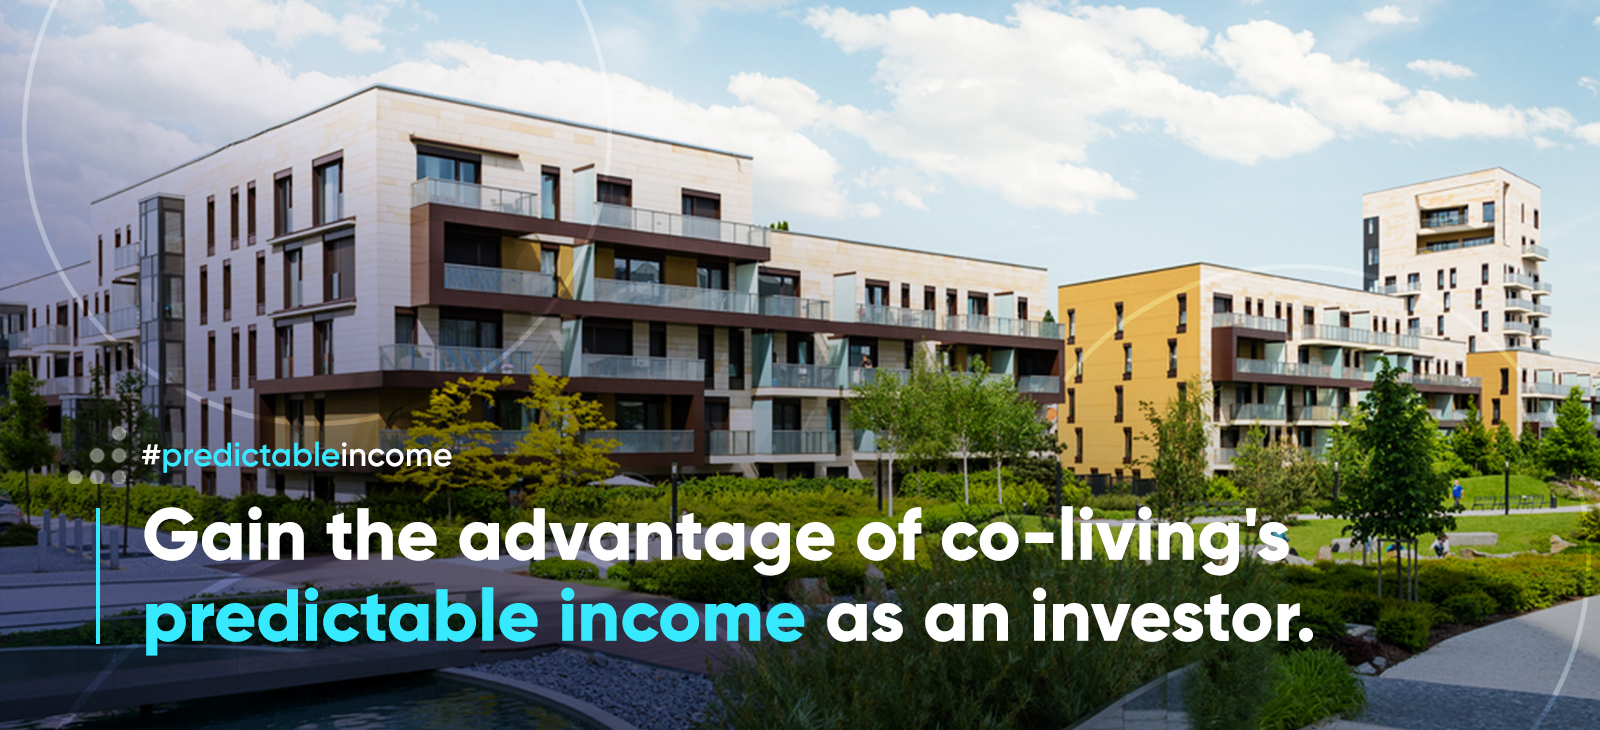 Gain the advantage of co-living’s predictable income as an investor 